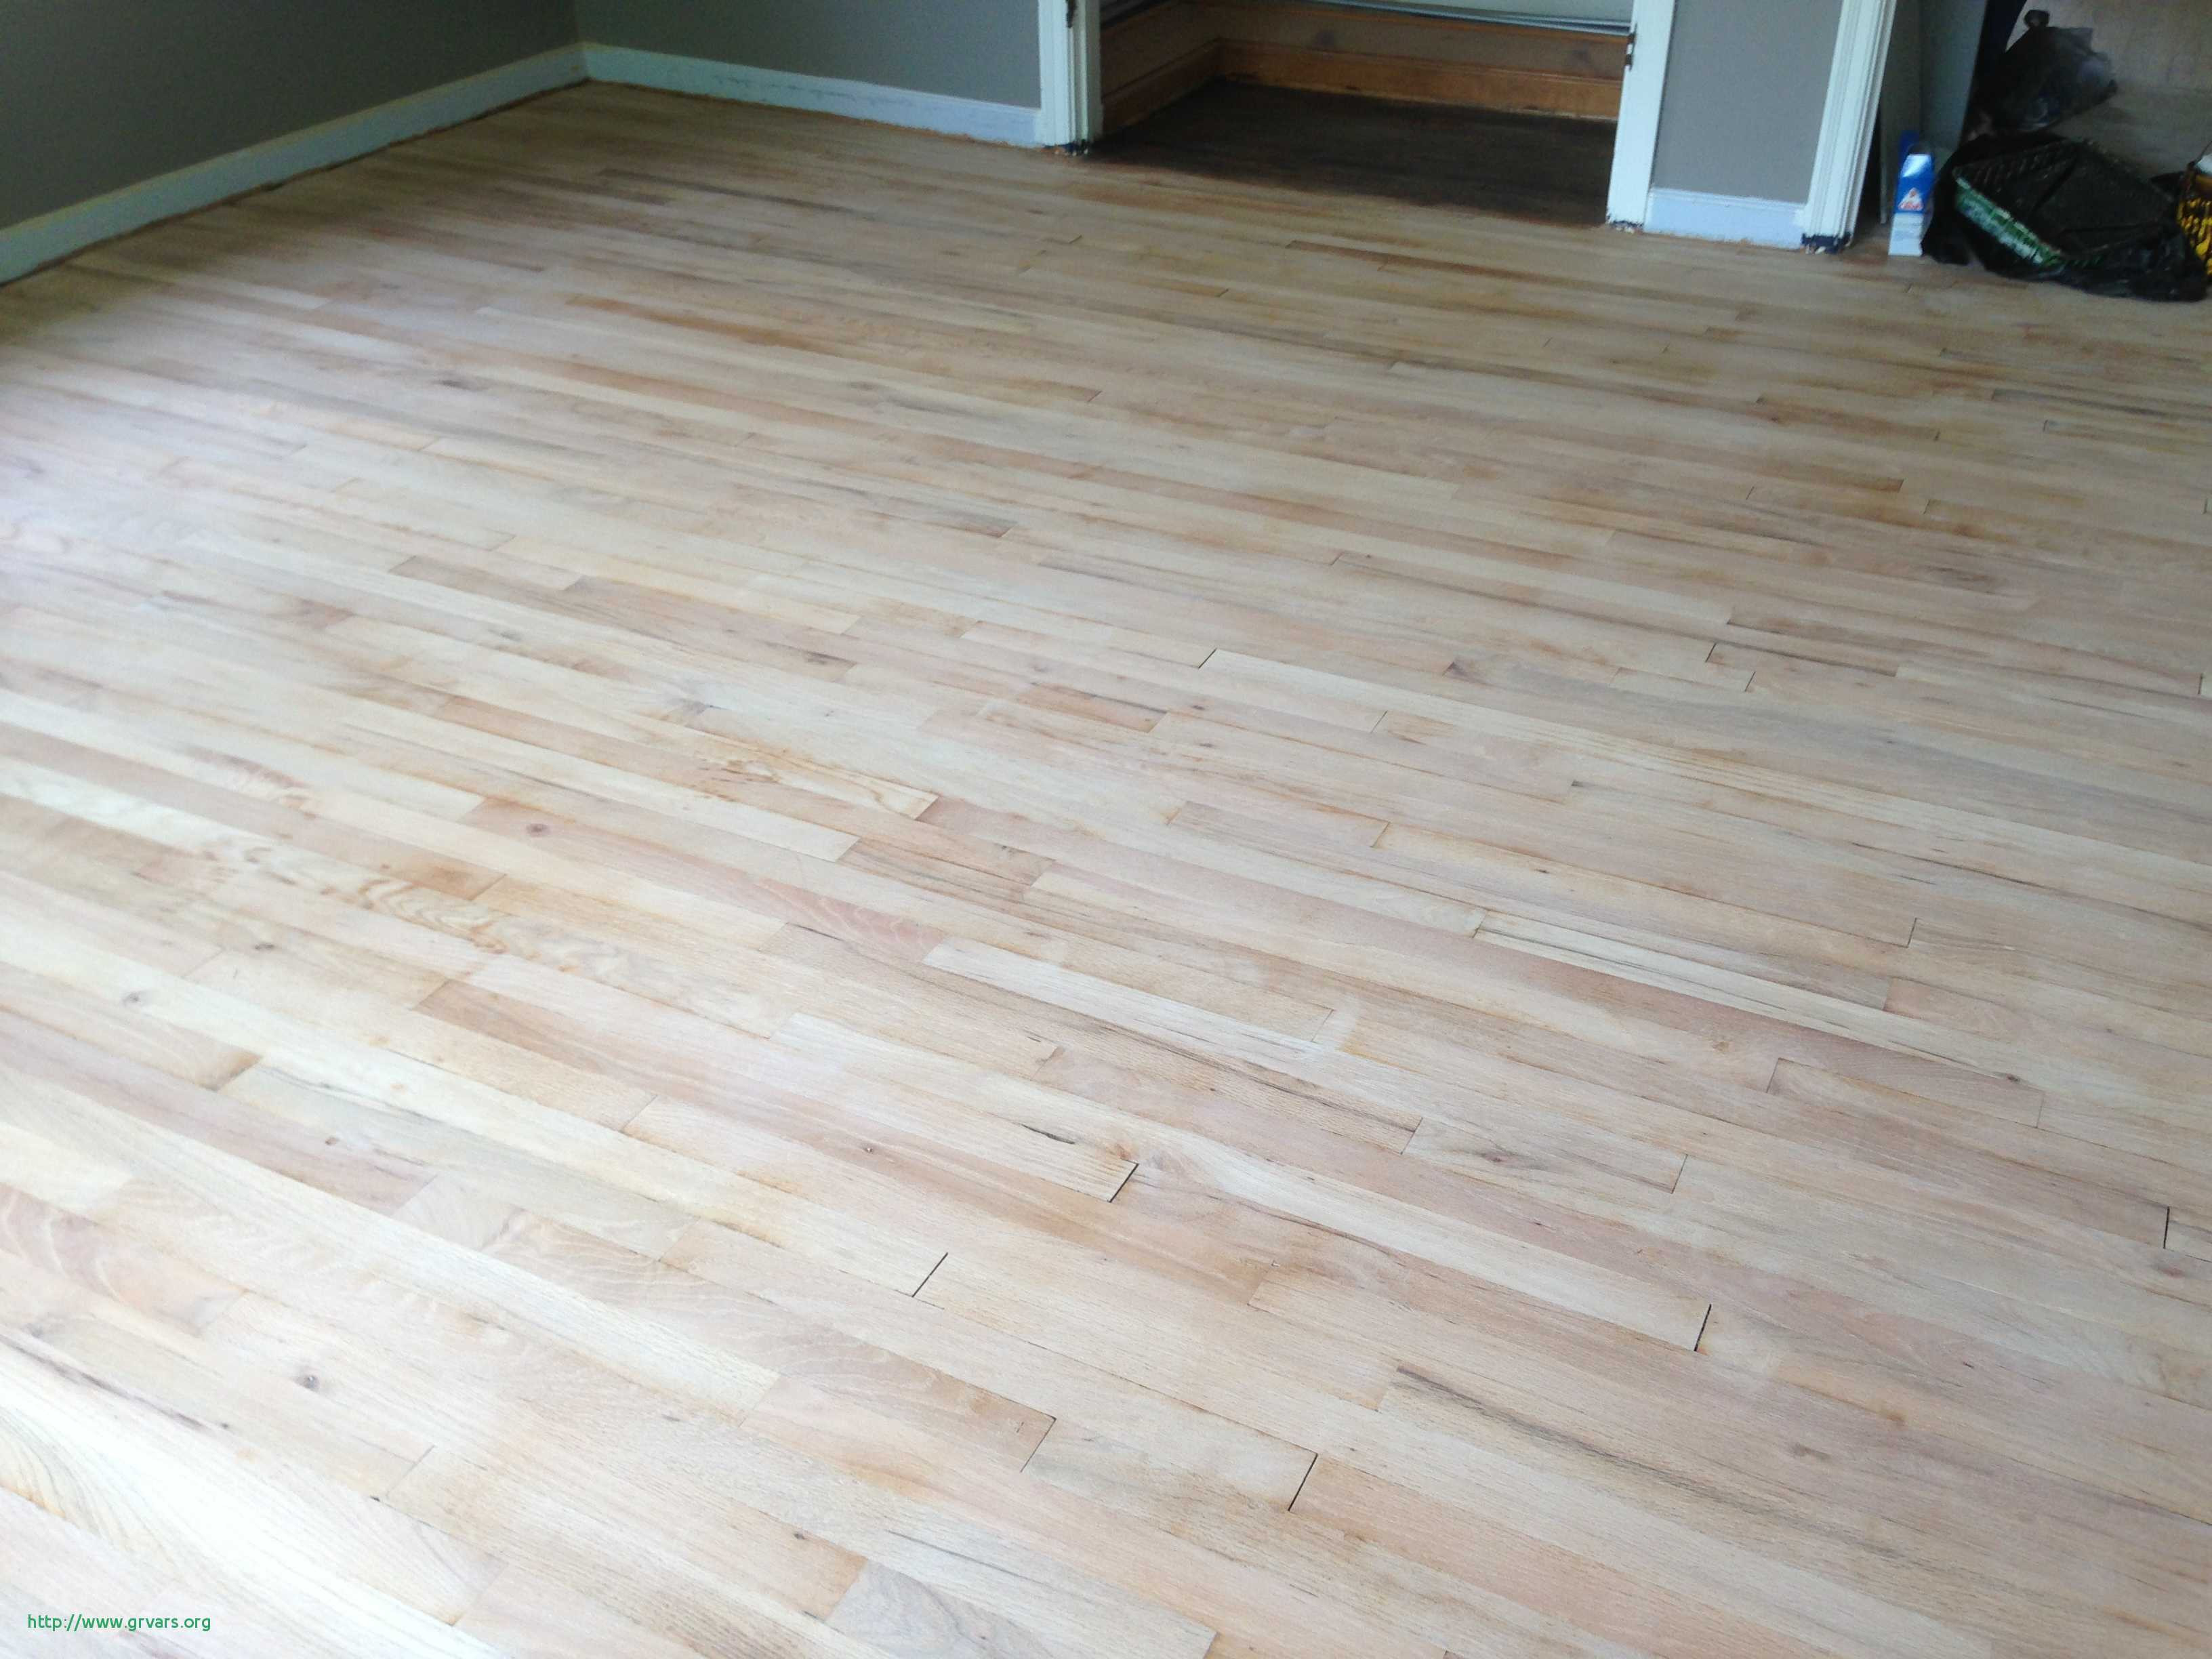 11 attractive Lowes 3 4 Hardwood Flooring 2024 free download lowes 3 4 hardwood flooring of 24 nouveau does lowes rent floor sanders ideas blog inside after tediously sanding the floors we were ready for the next step of staining and sealing